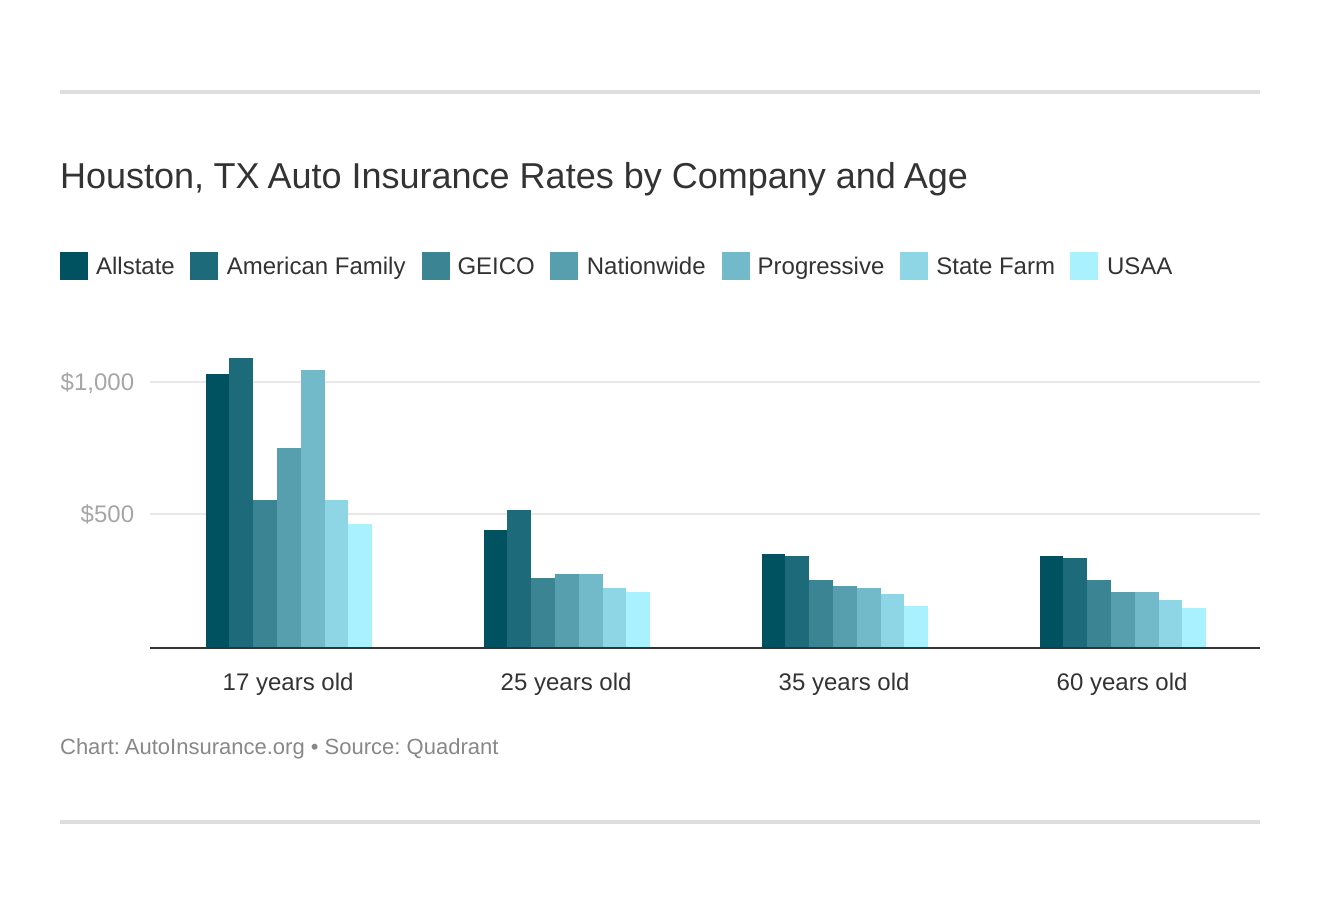 Houston, TX Auto Insurance Rates by Company and Age